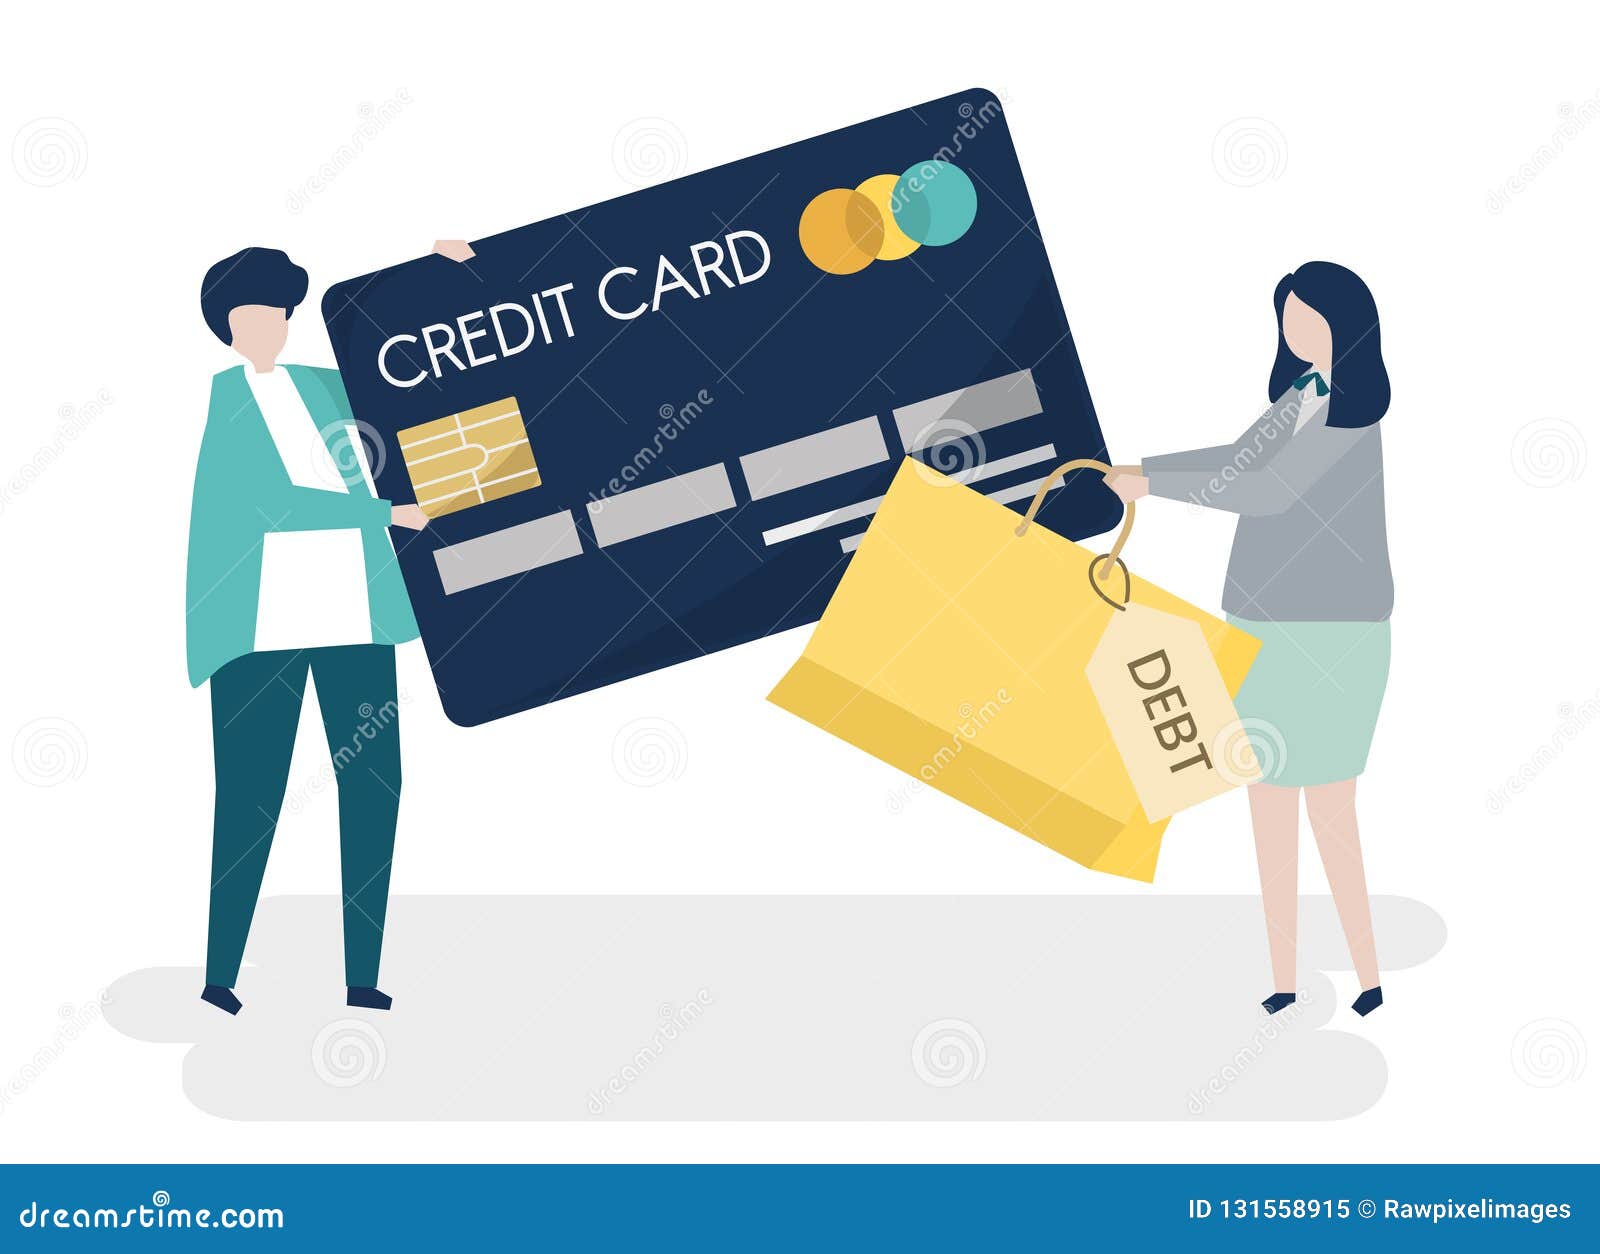 people characters and credit card debt concept 